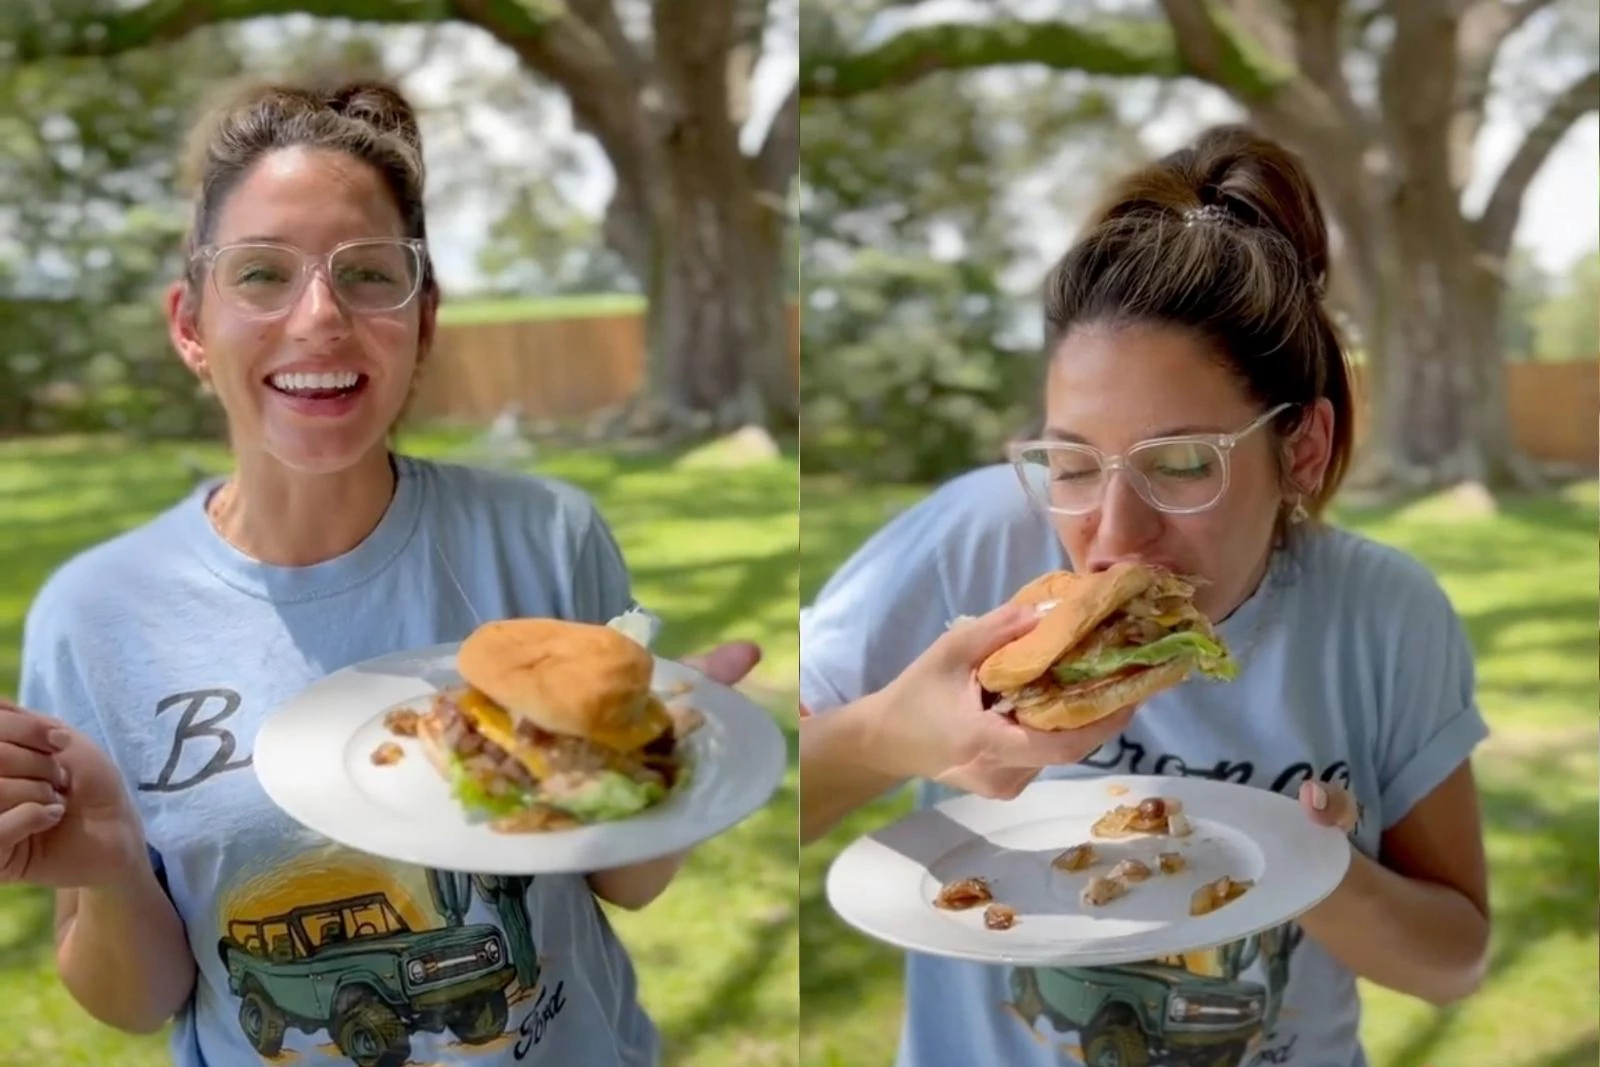 Want In-N-Out Burger in Louisiana? This TikToker Has the Recipe